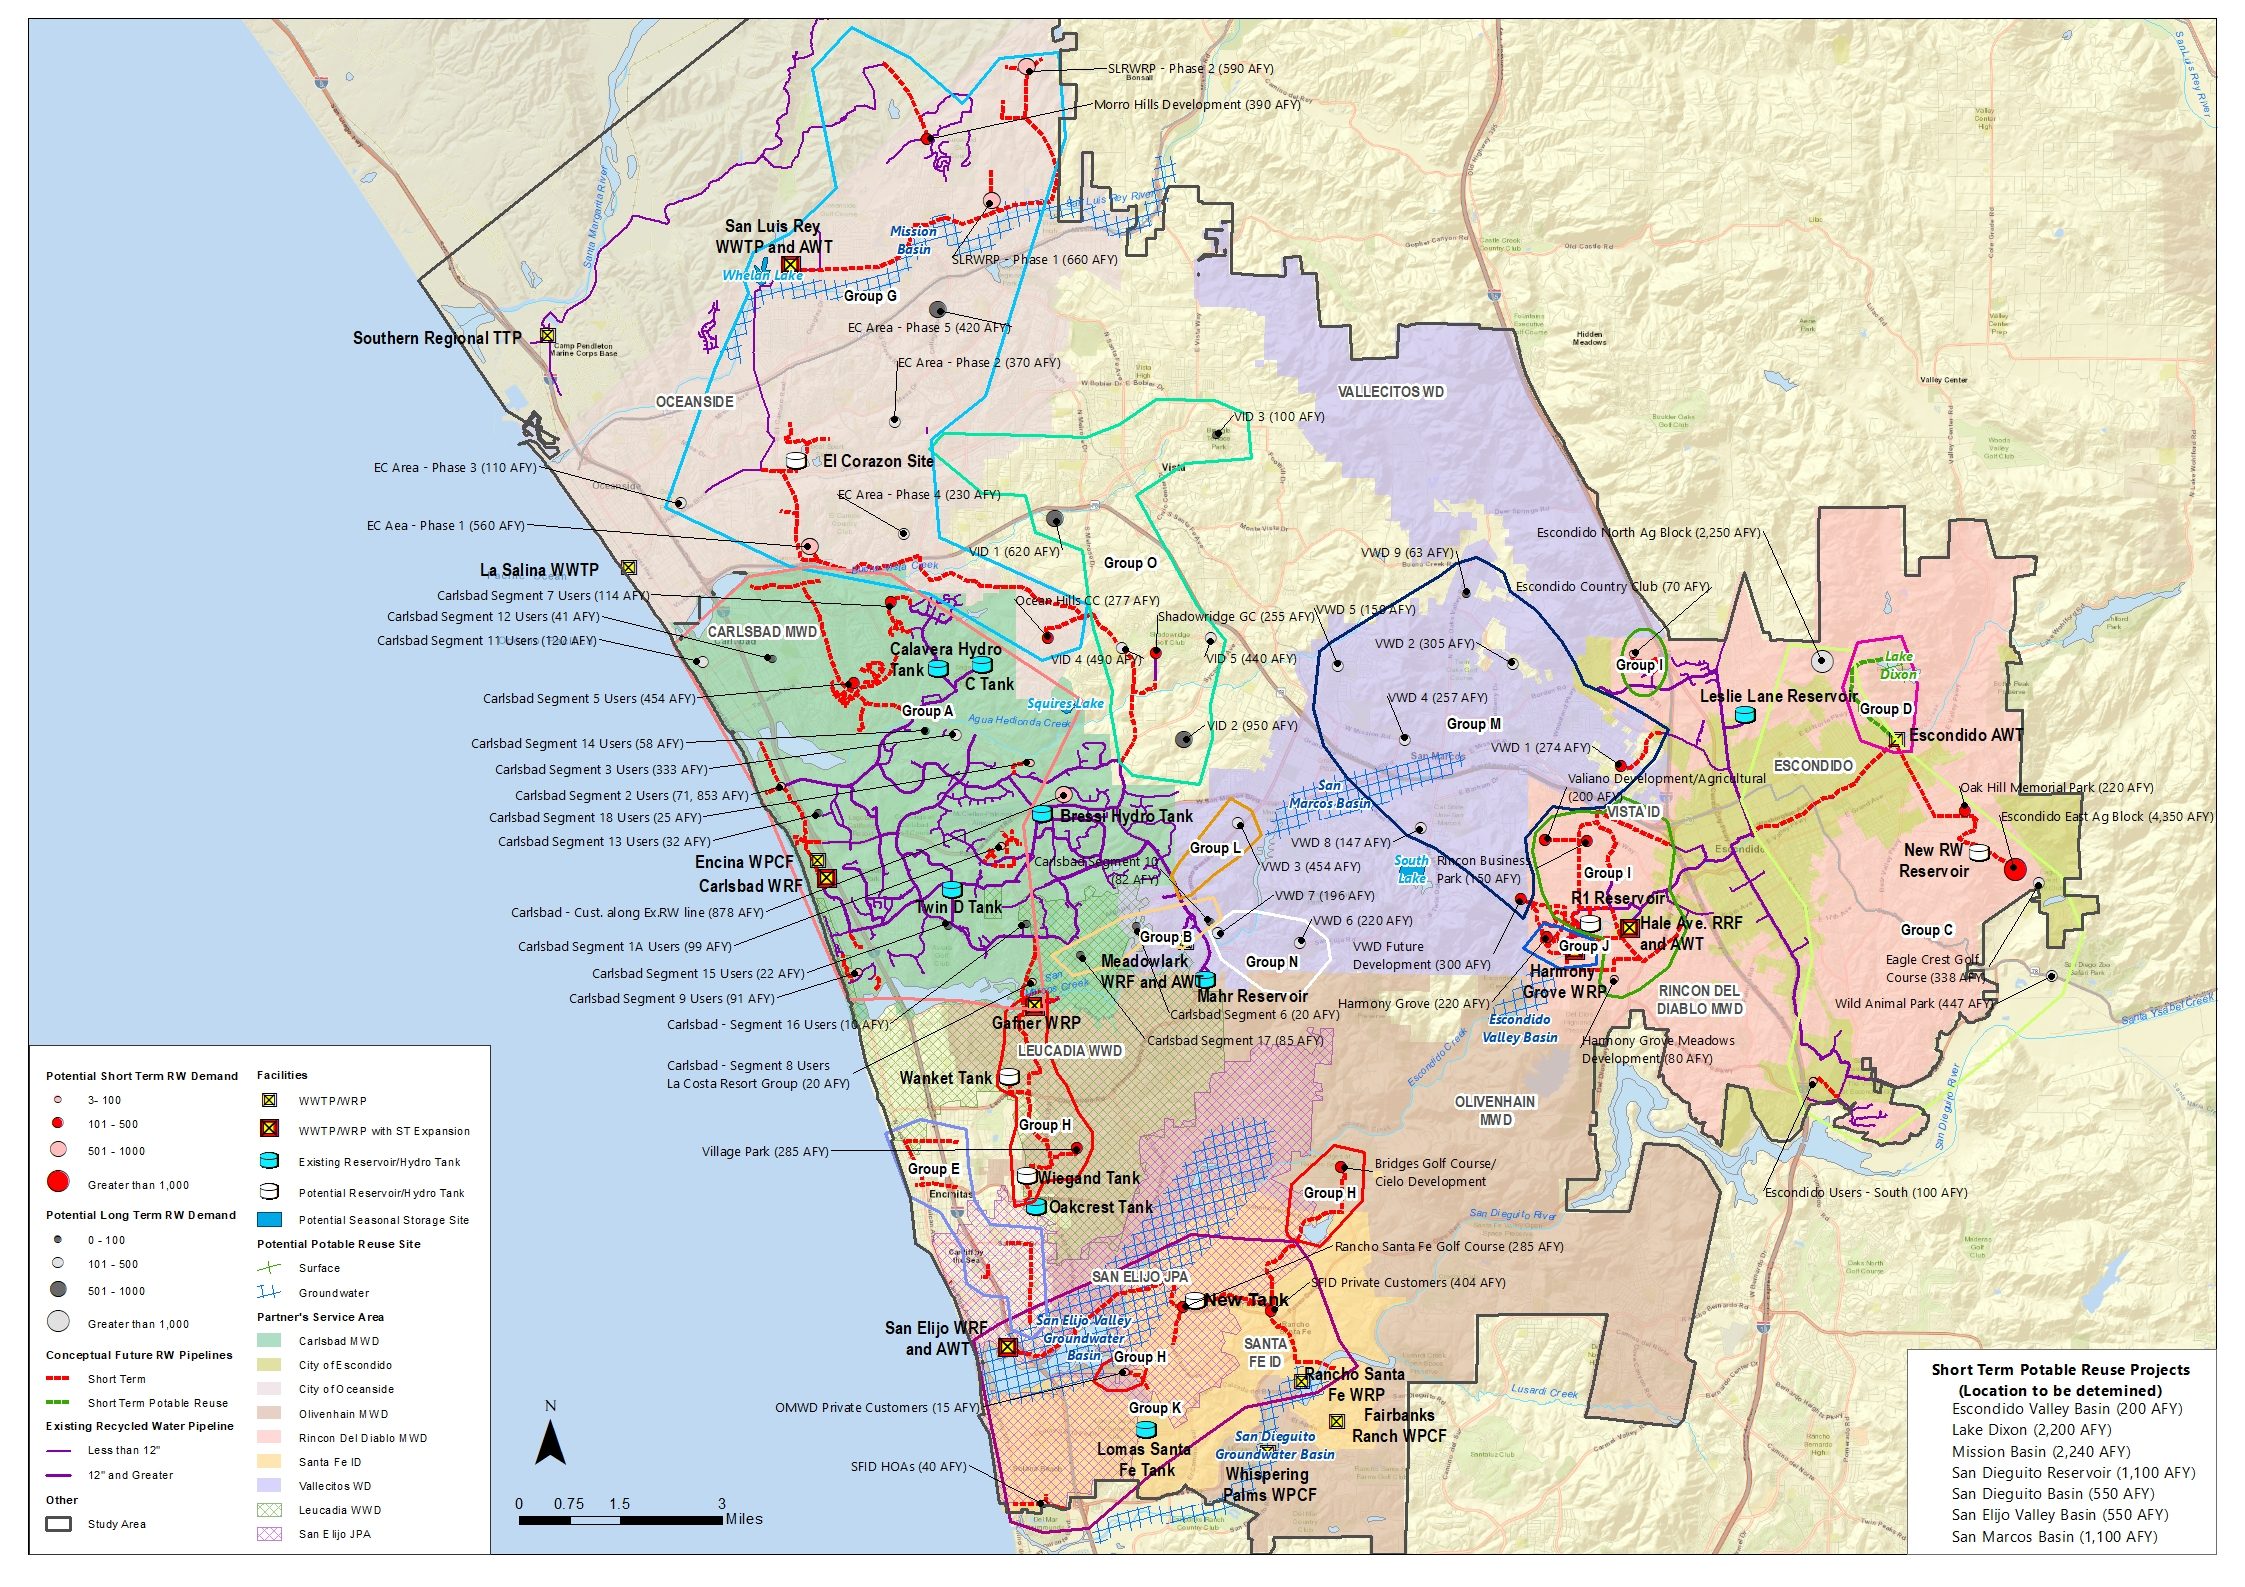 Project Overview-North San Dieg County Water Reuse Coalition